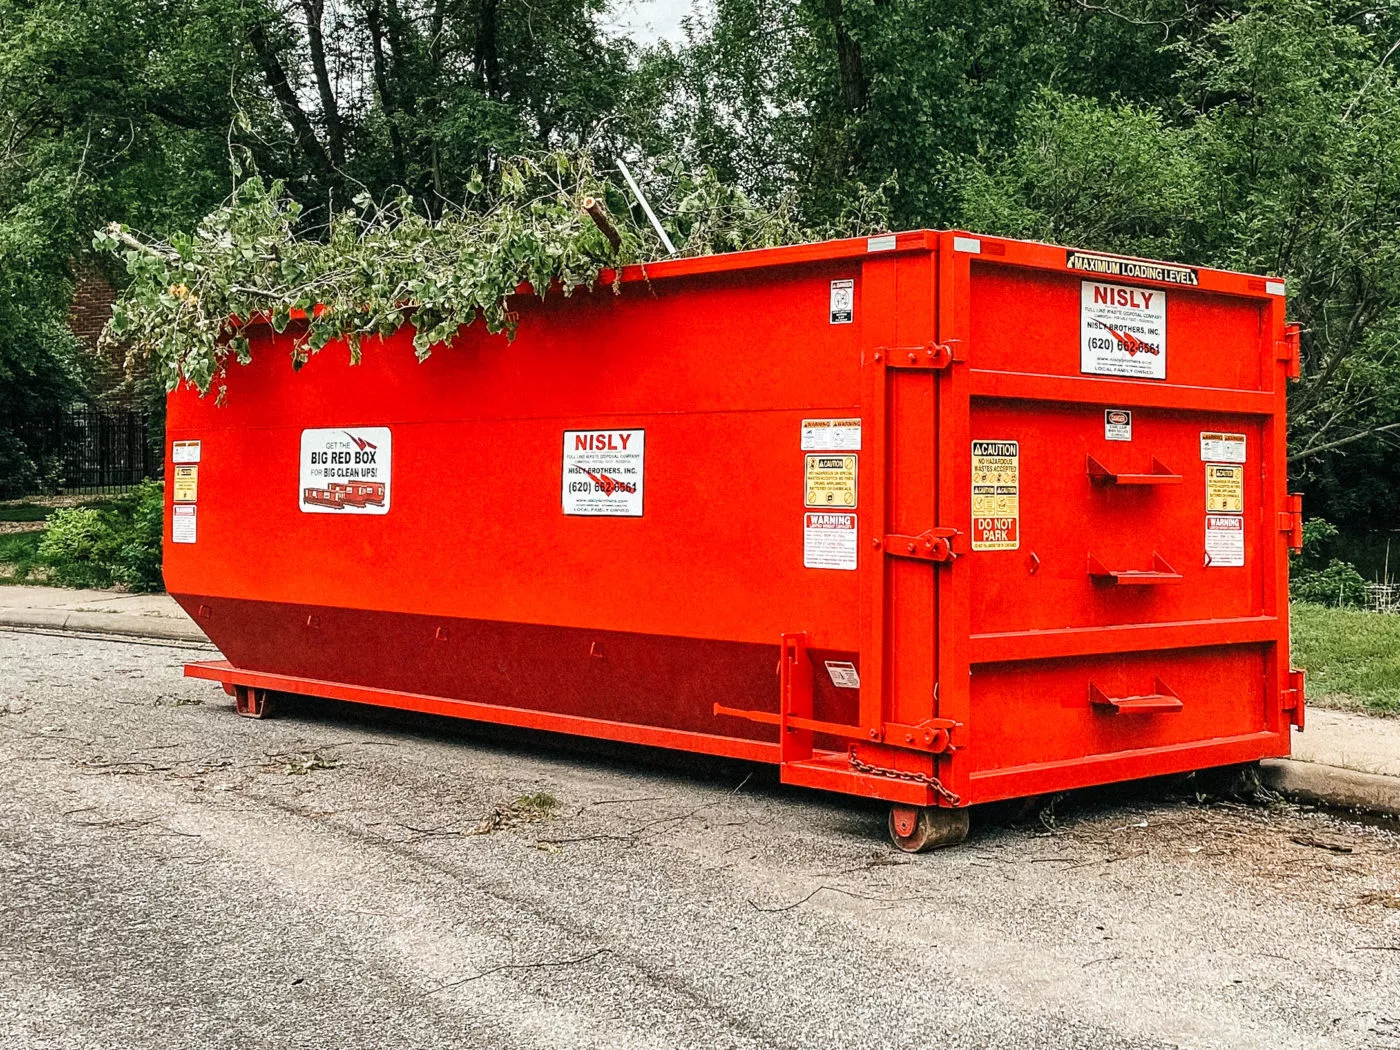 40 yard dumpster rental for simple and affordable cleanup near kingman kansas